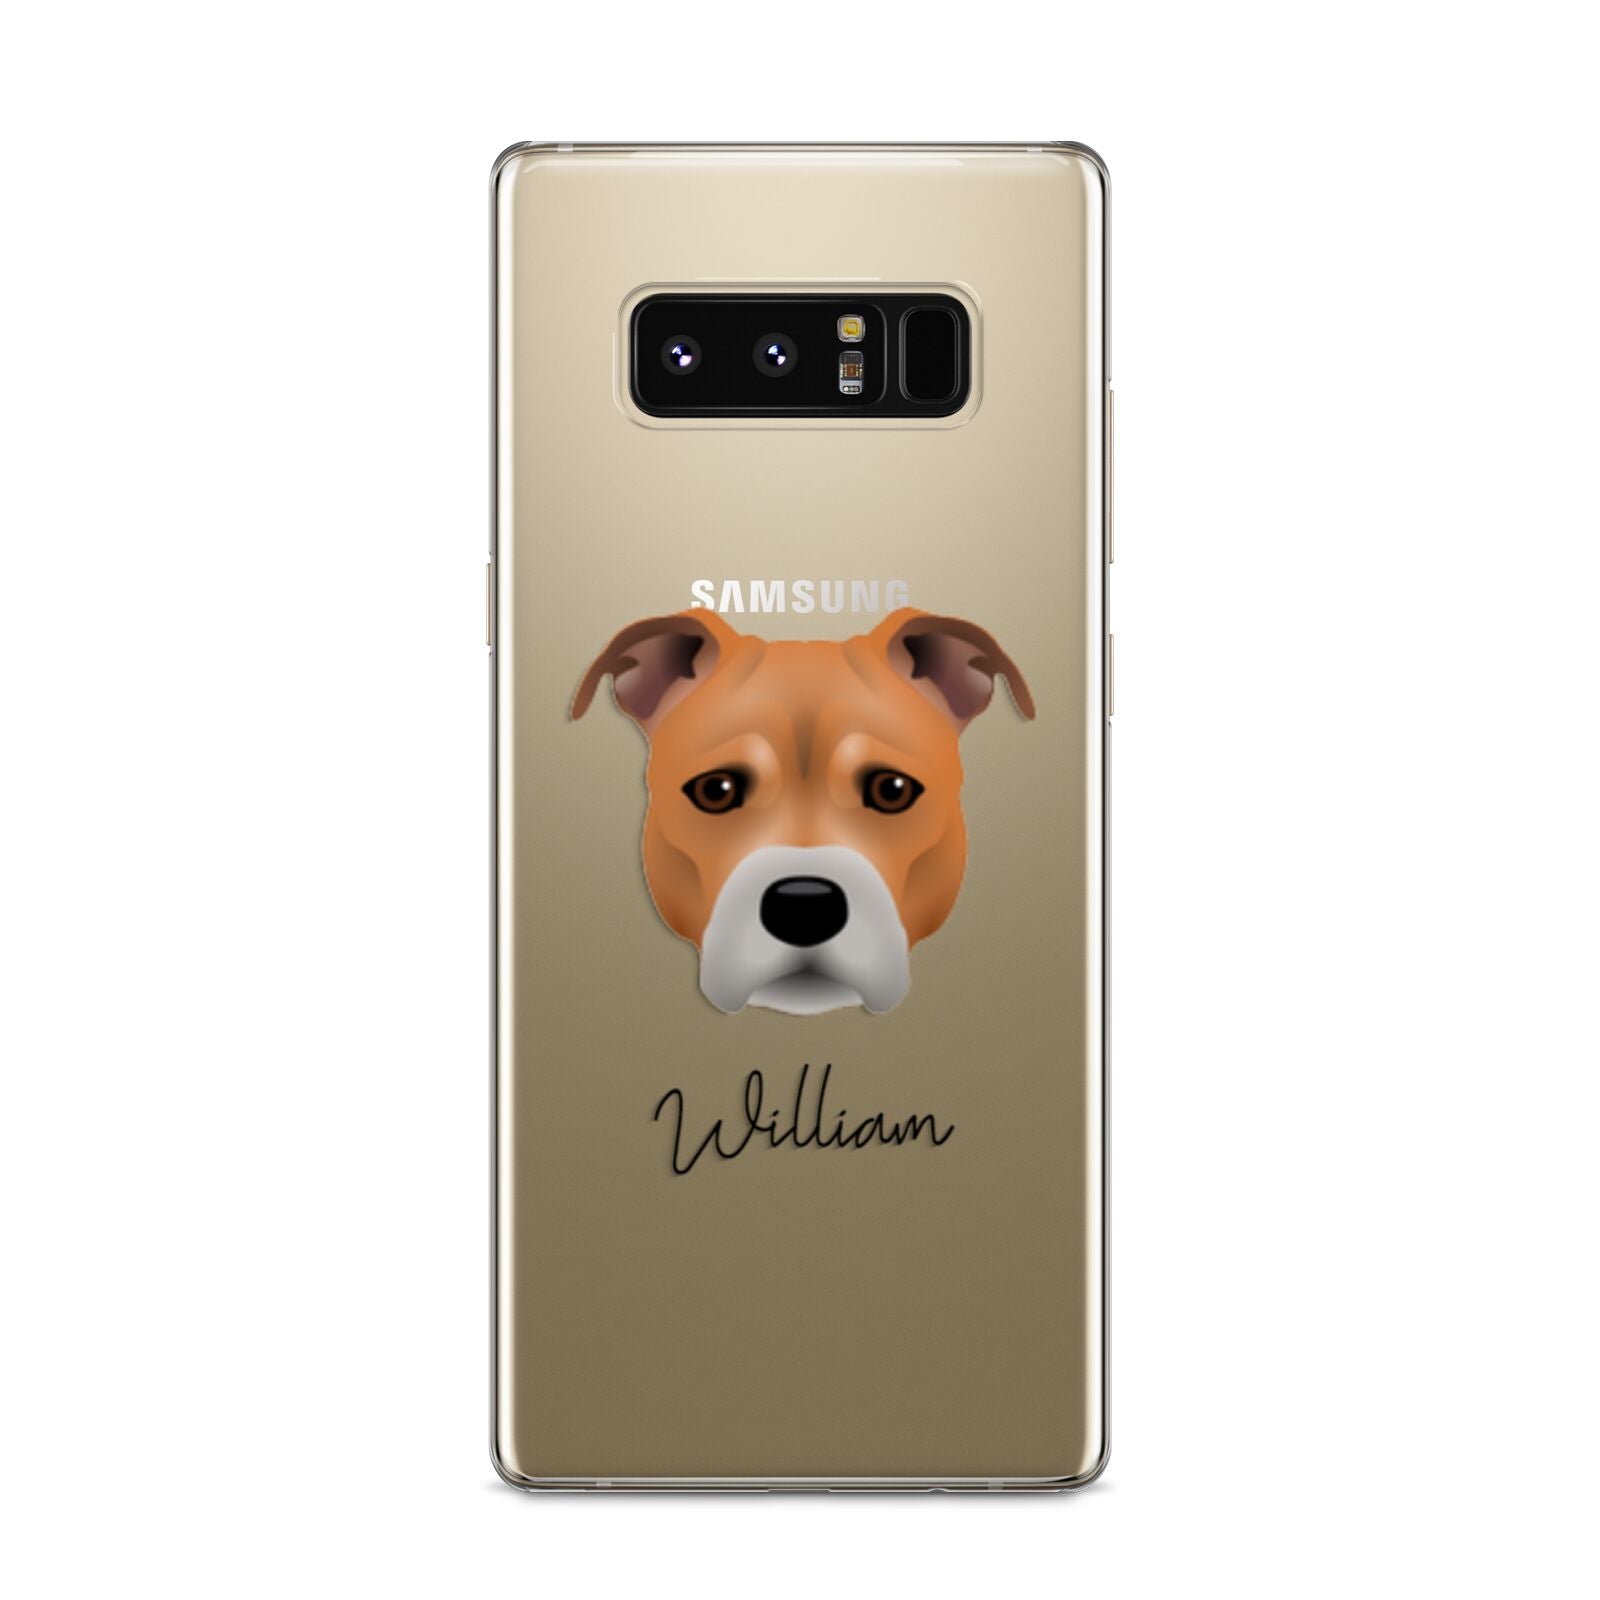 Staffordshire Bull Terrier Personalised Samsung Galaxy S8 Case